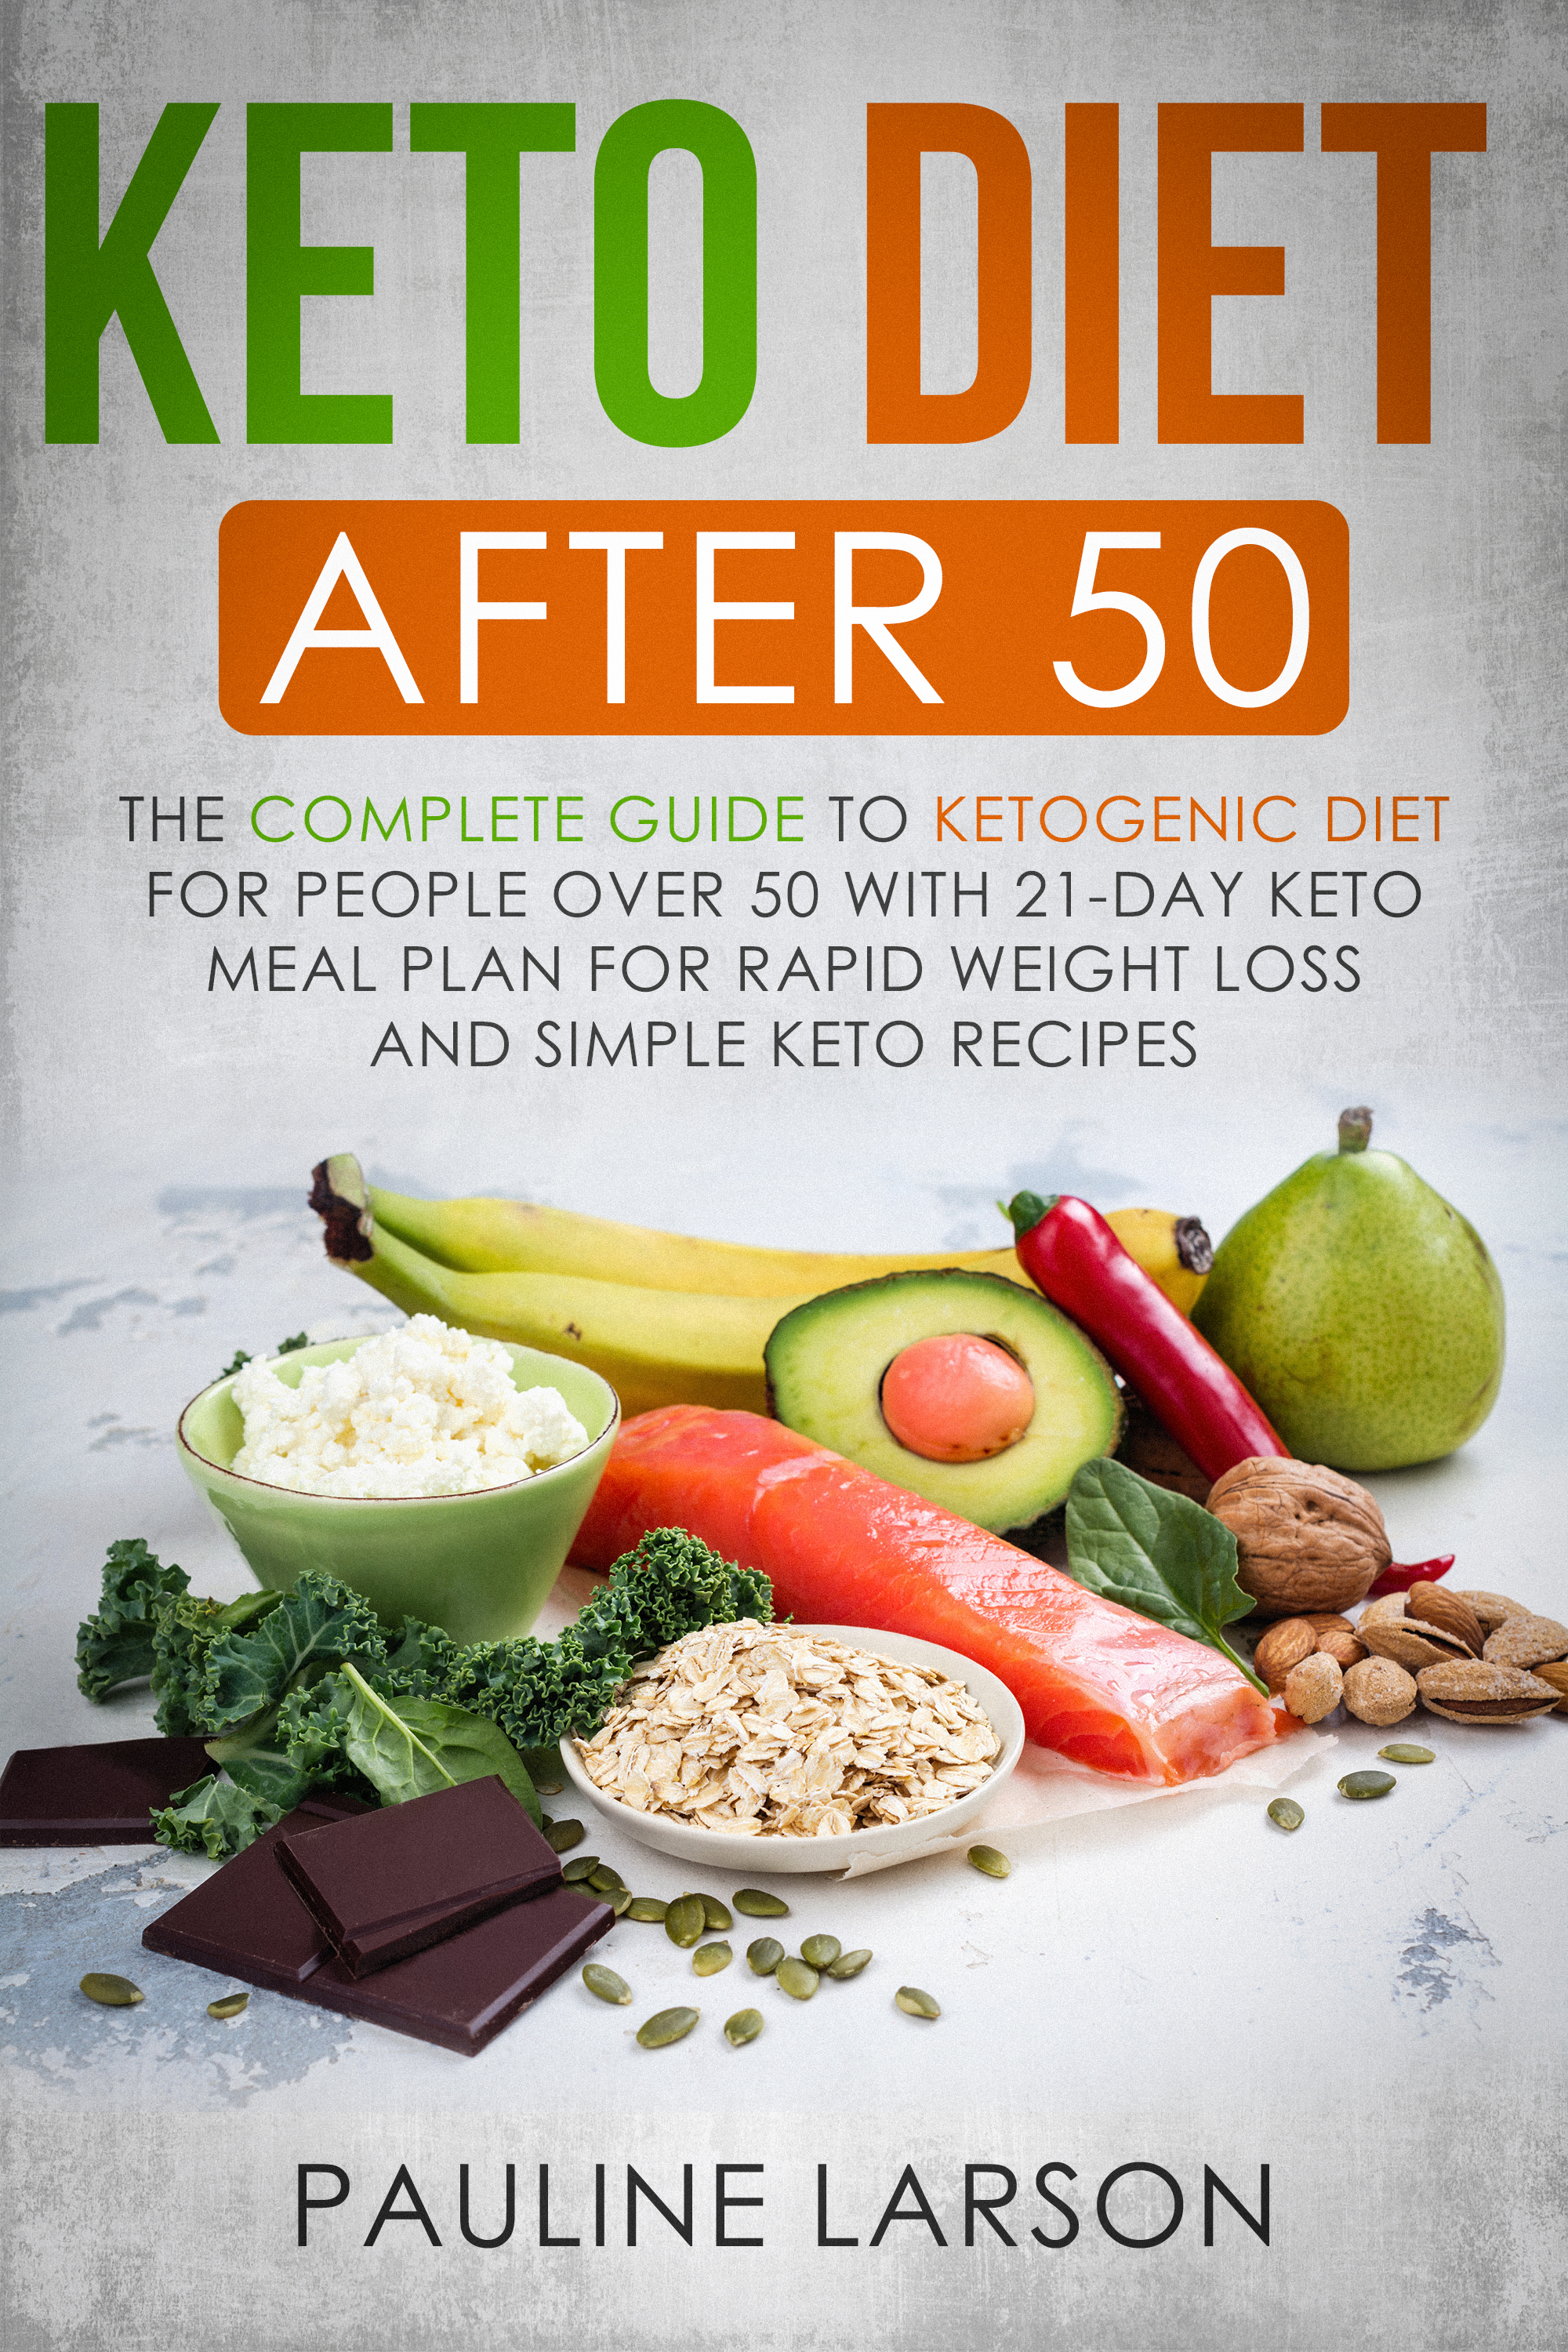 FREE: Keto Diet After 50: The Complete Guide to Ketogenic Diet for People Over 50 with 21-Day Keto Meal Plan for Rapid Weight Loss and Simple Keto Recipes by Pauline Larson